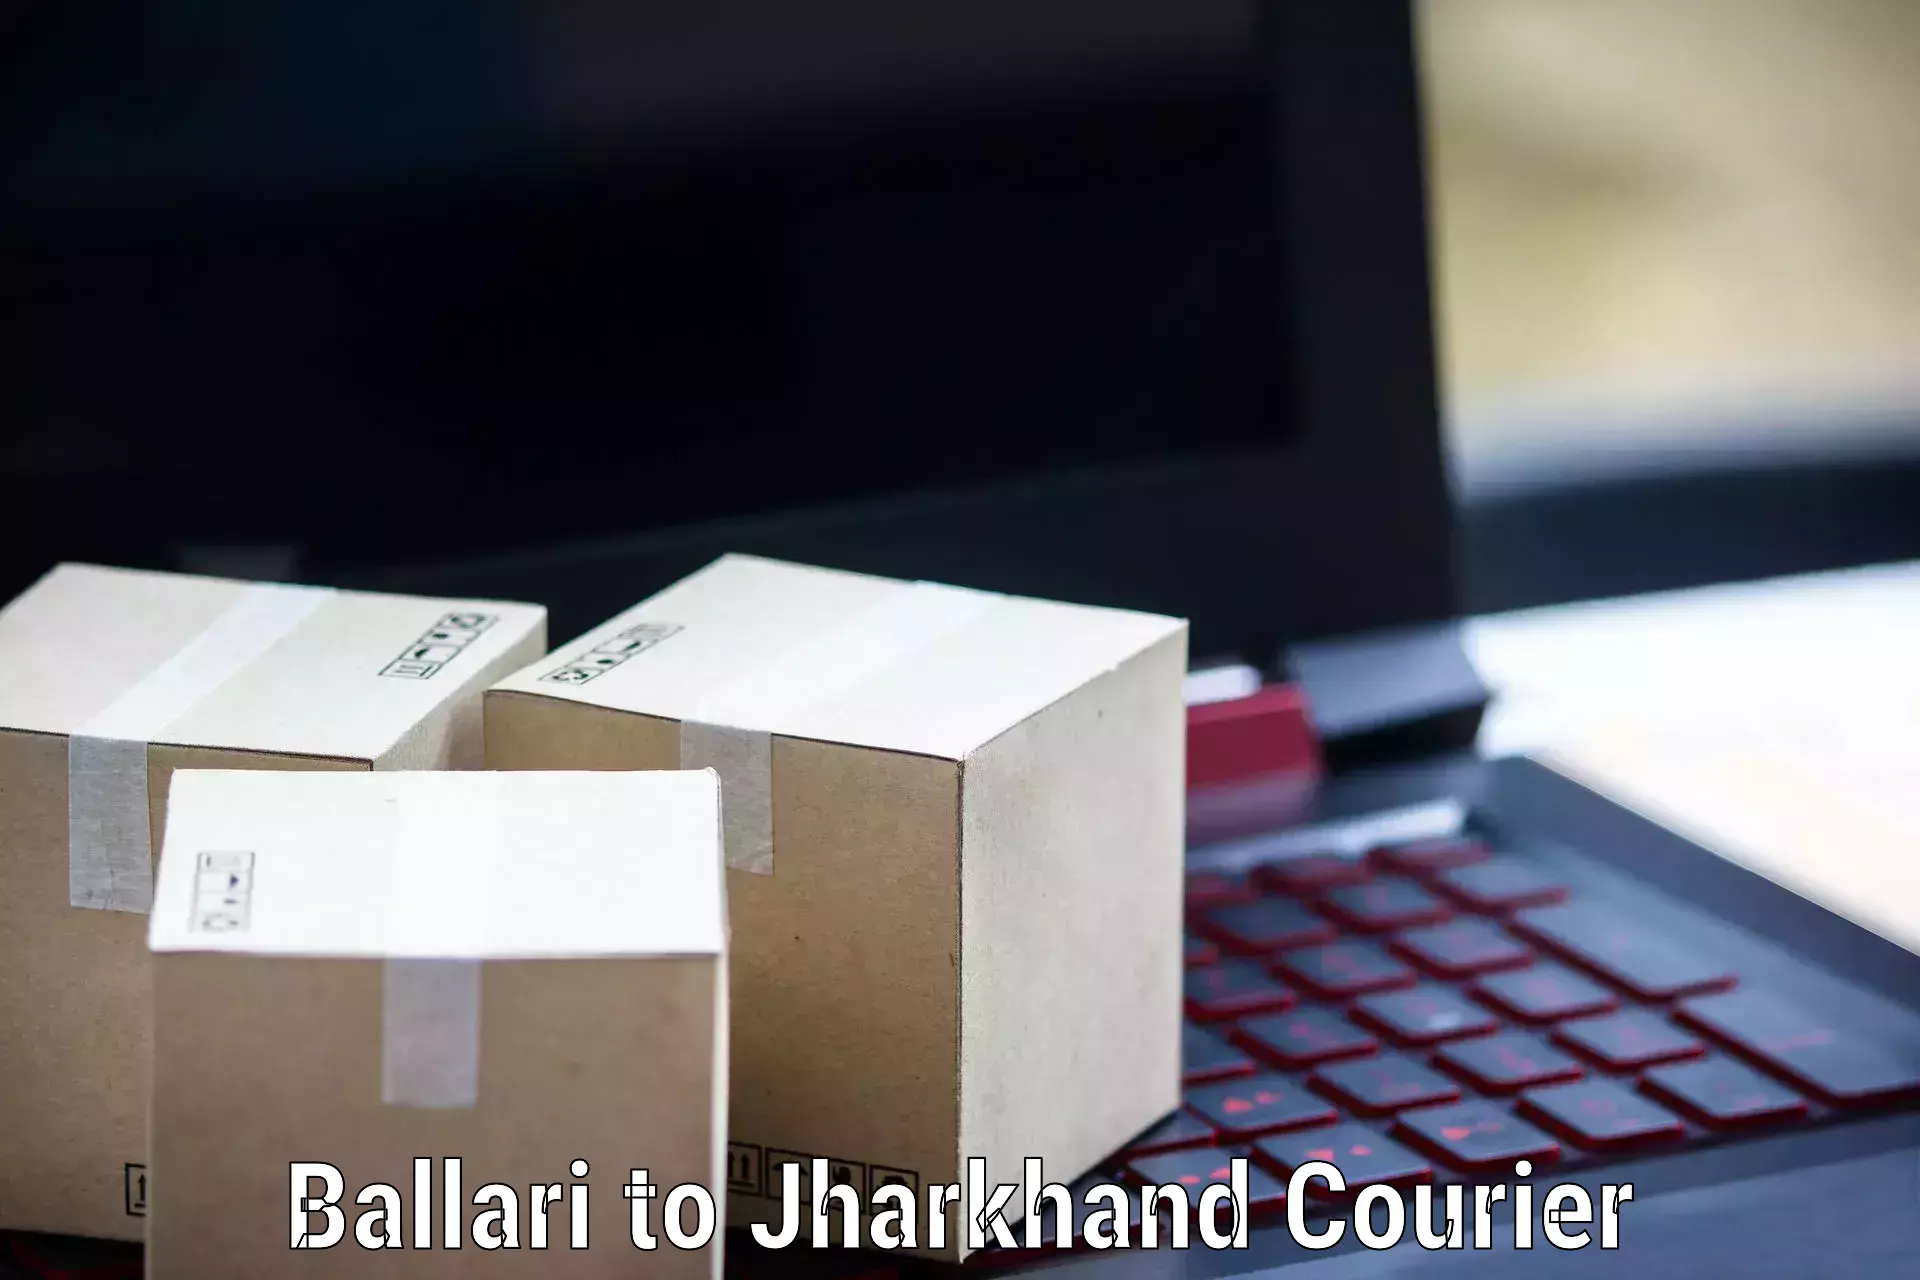 Business delivery service in Ballari to Dhanbad